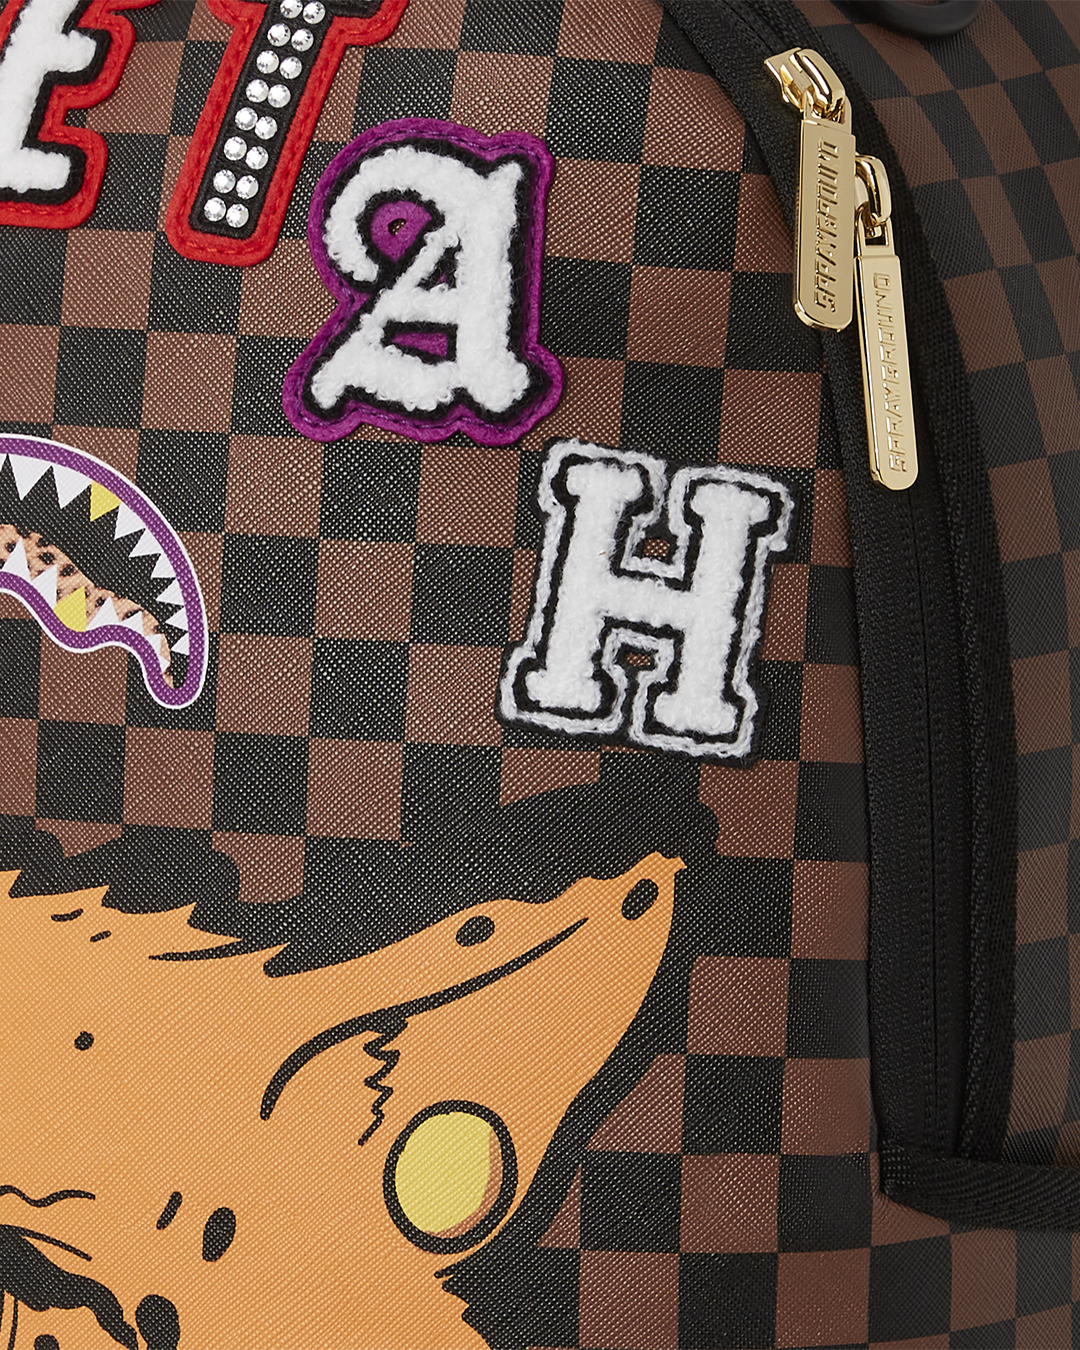 The Cheetah. Fast! Decisive! Successful! The @cheetah Tyreek Hill Official  Collab Launches Now! @sprayground Photo: @leolensoficial